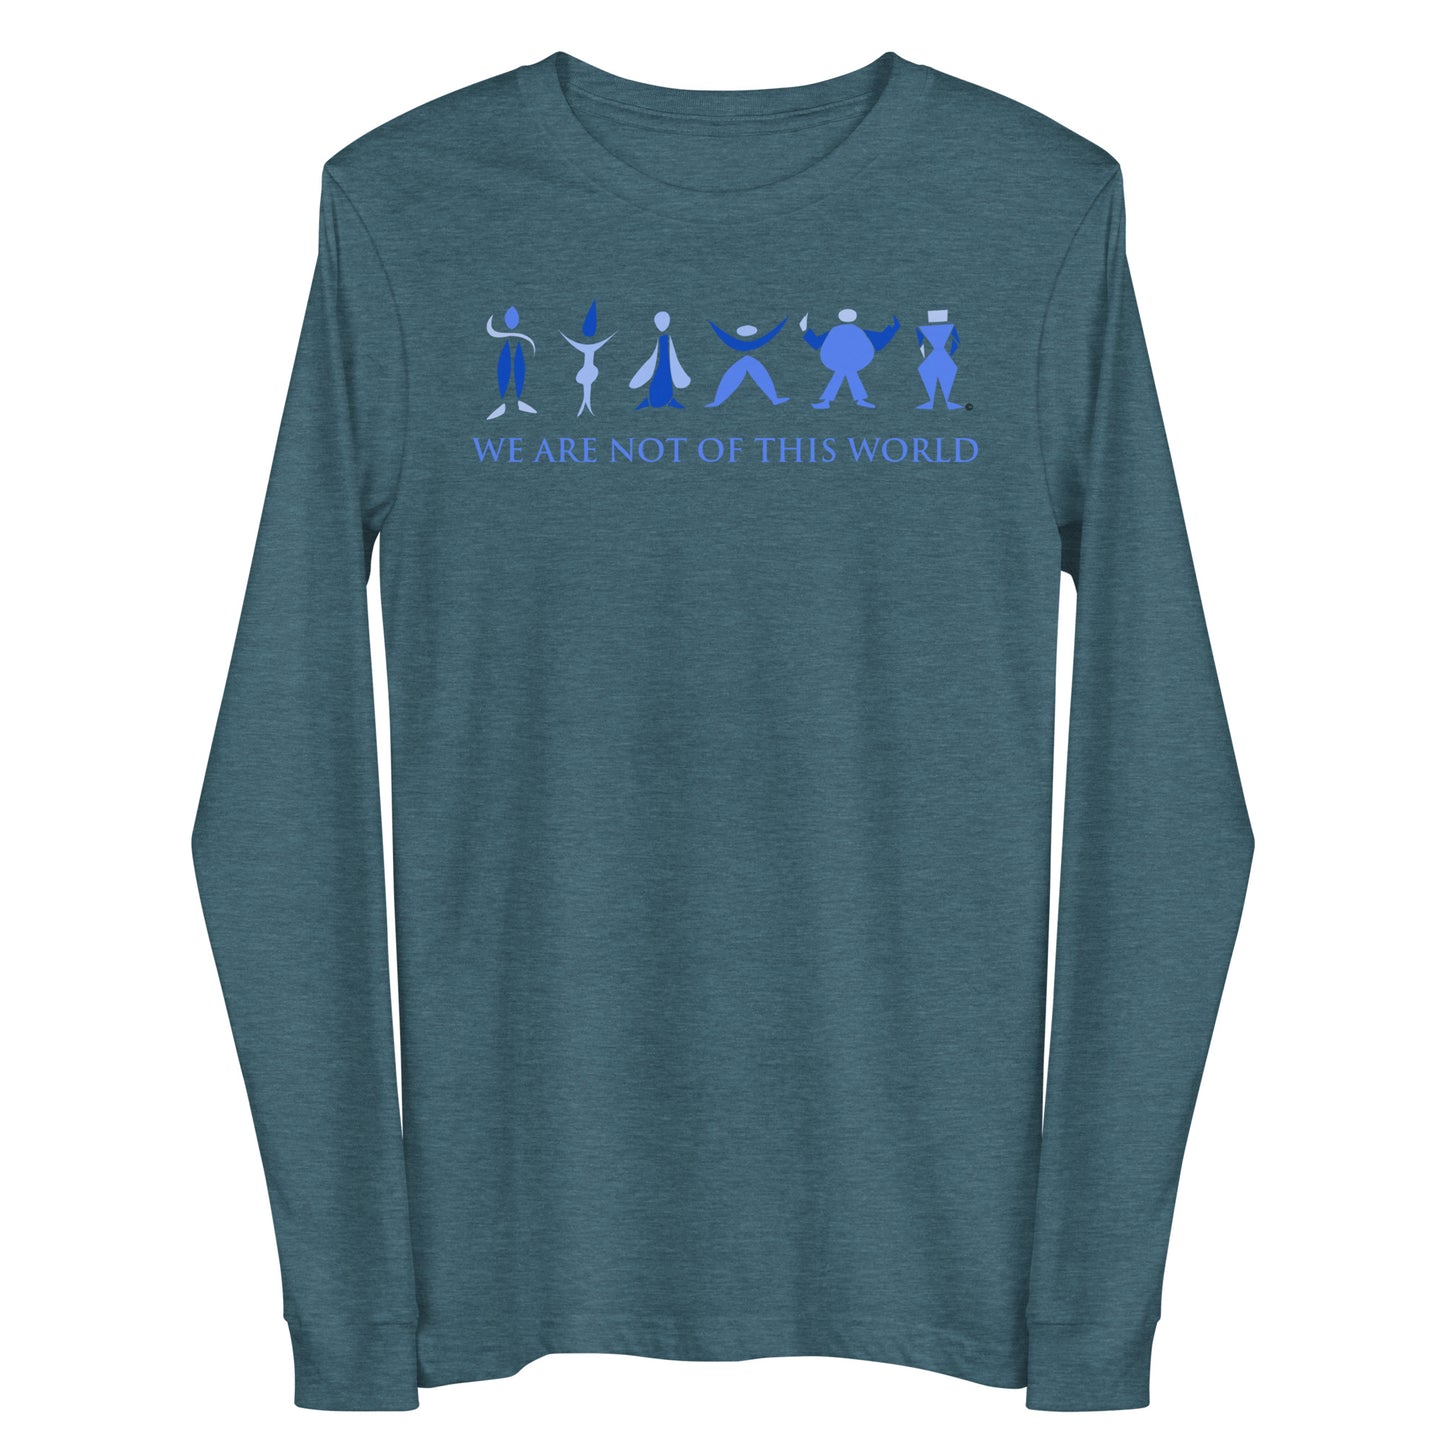 We Are Not of This World Women's Long Sleeve Tee